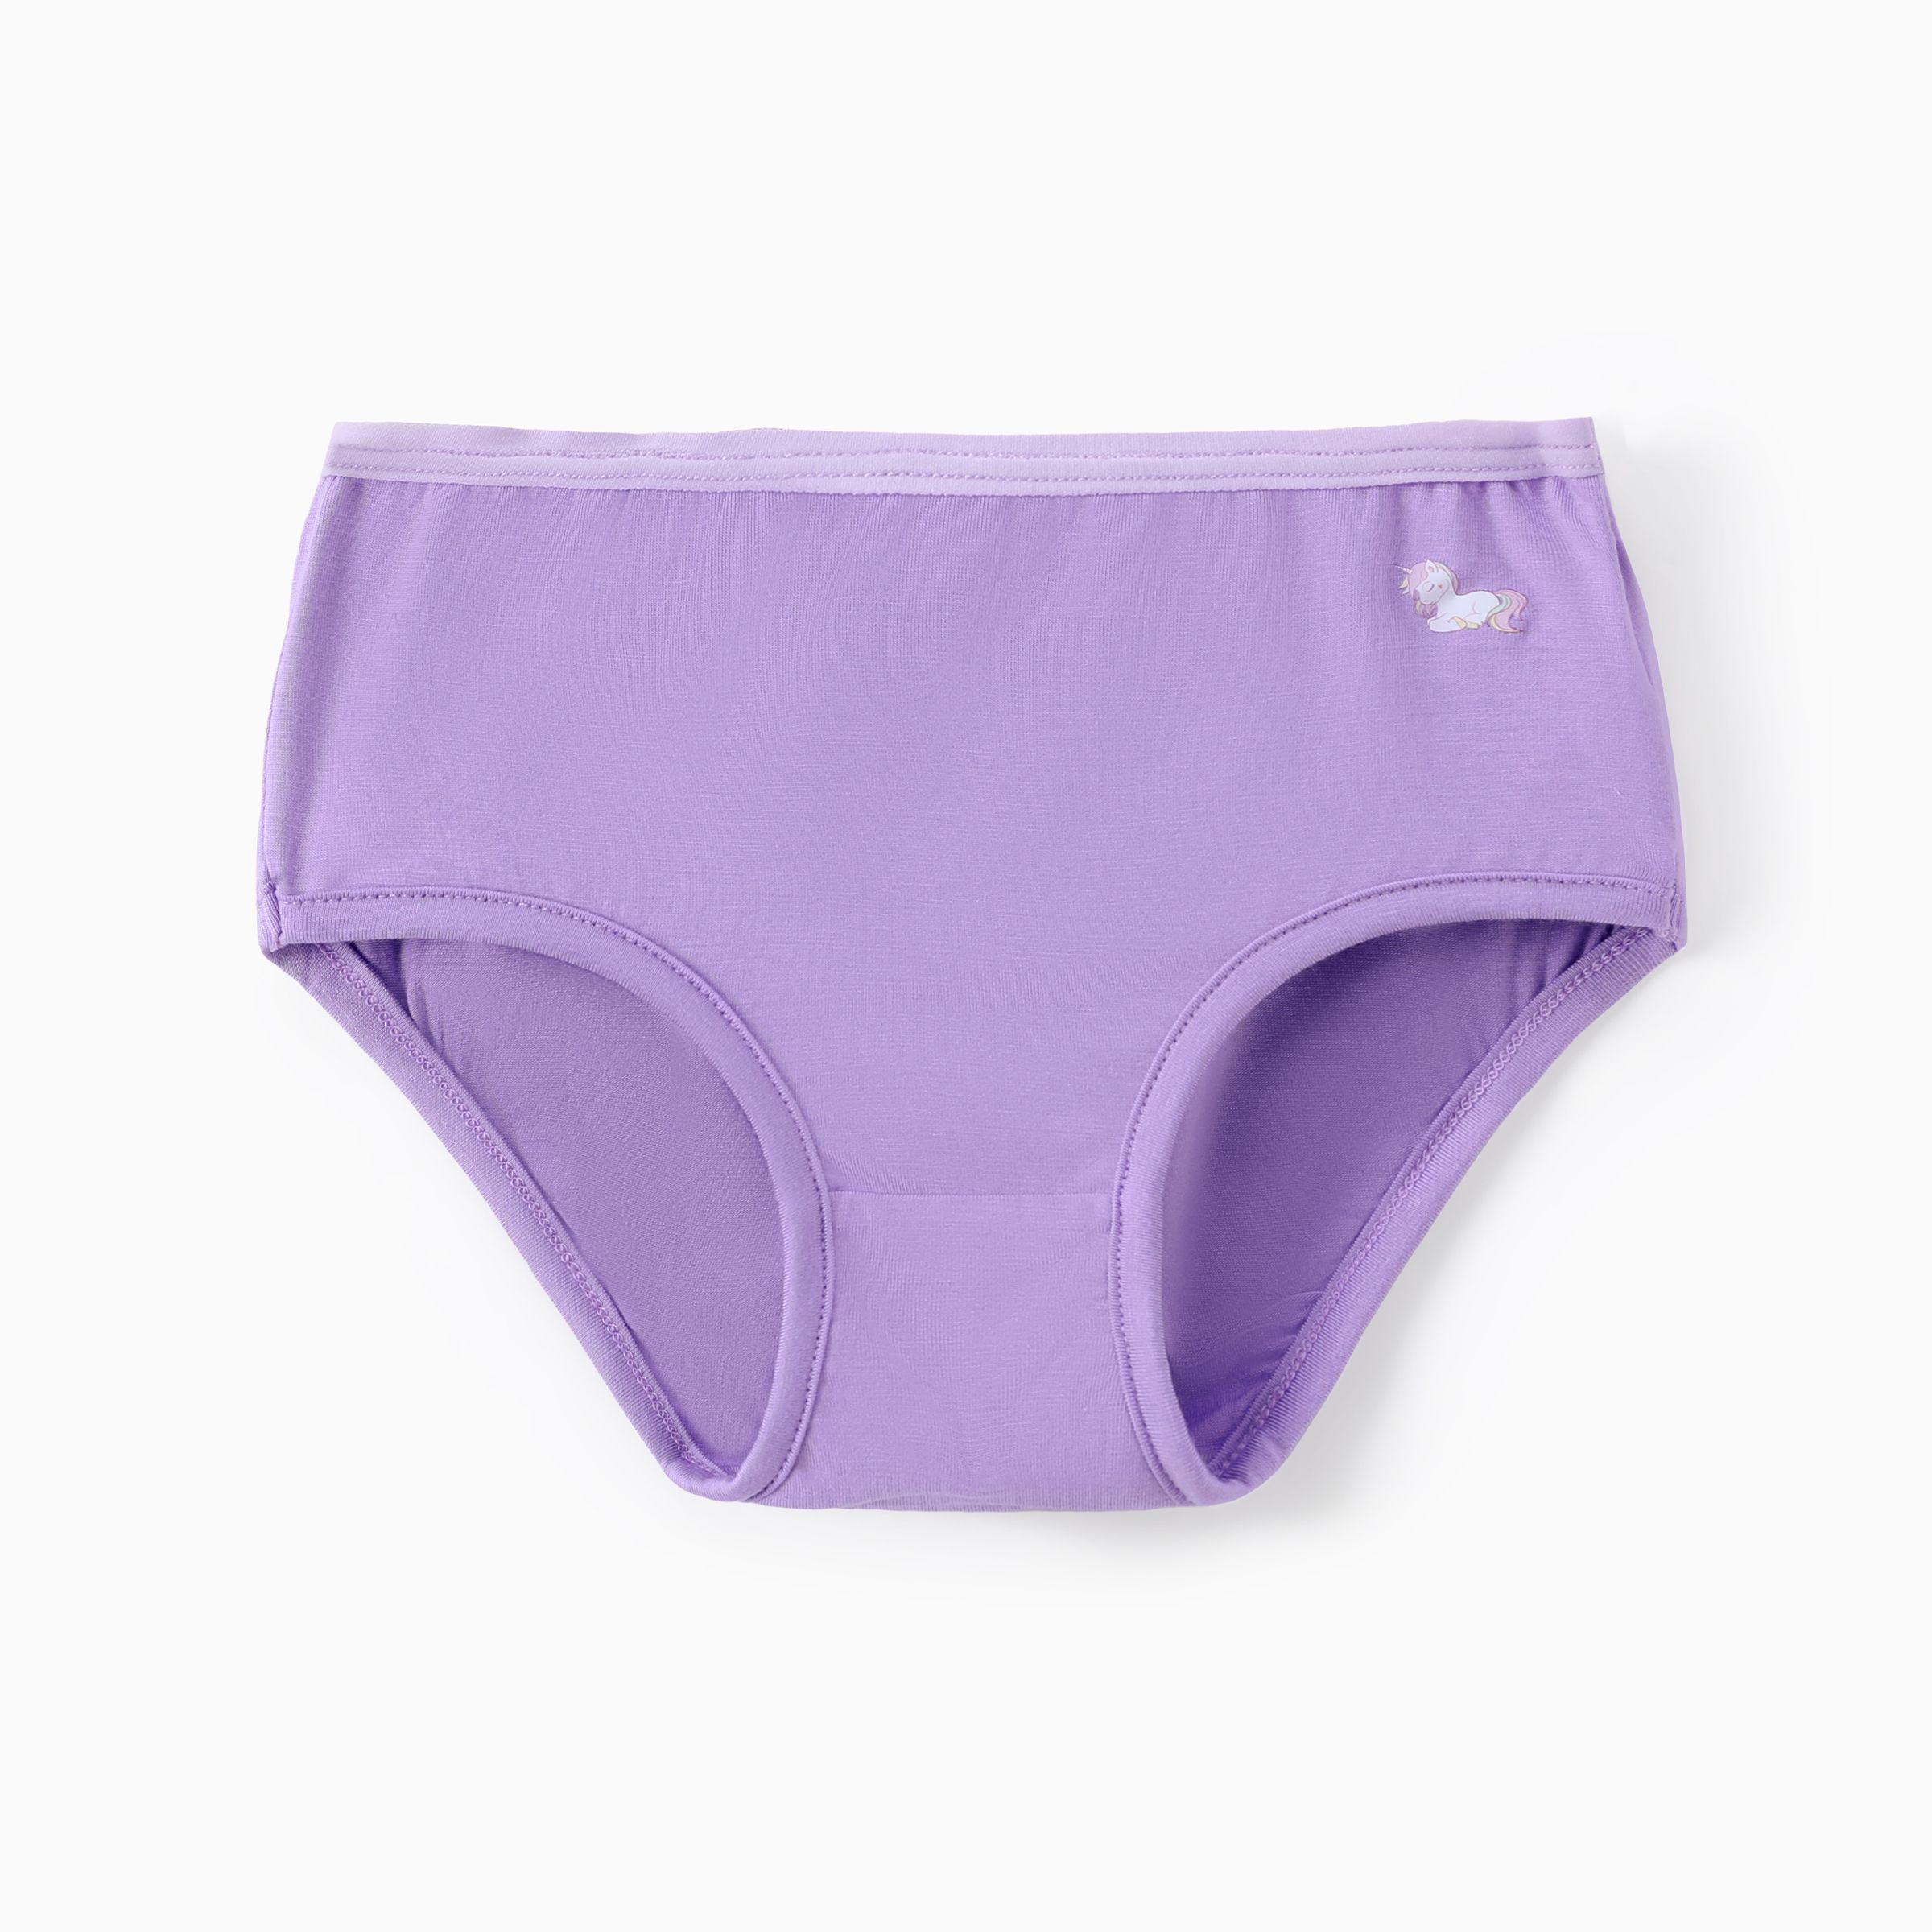 

Toddler Girl 1pcs Unicorn/Solid Color Underwear